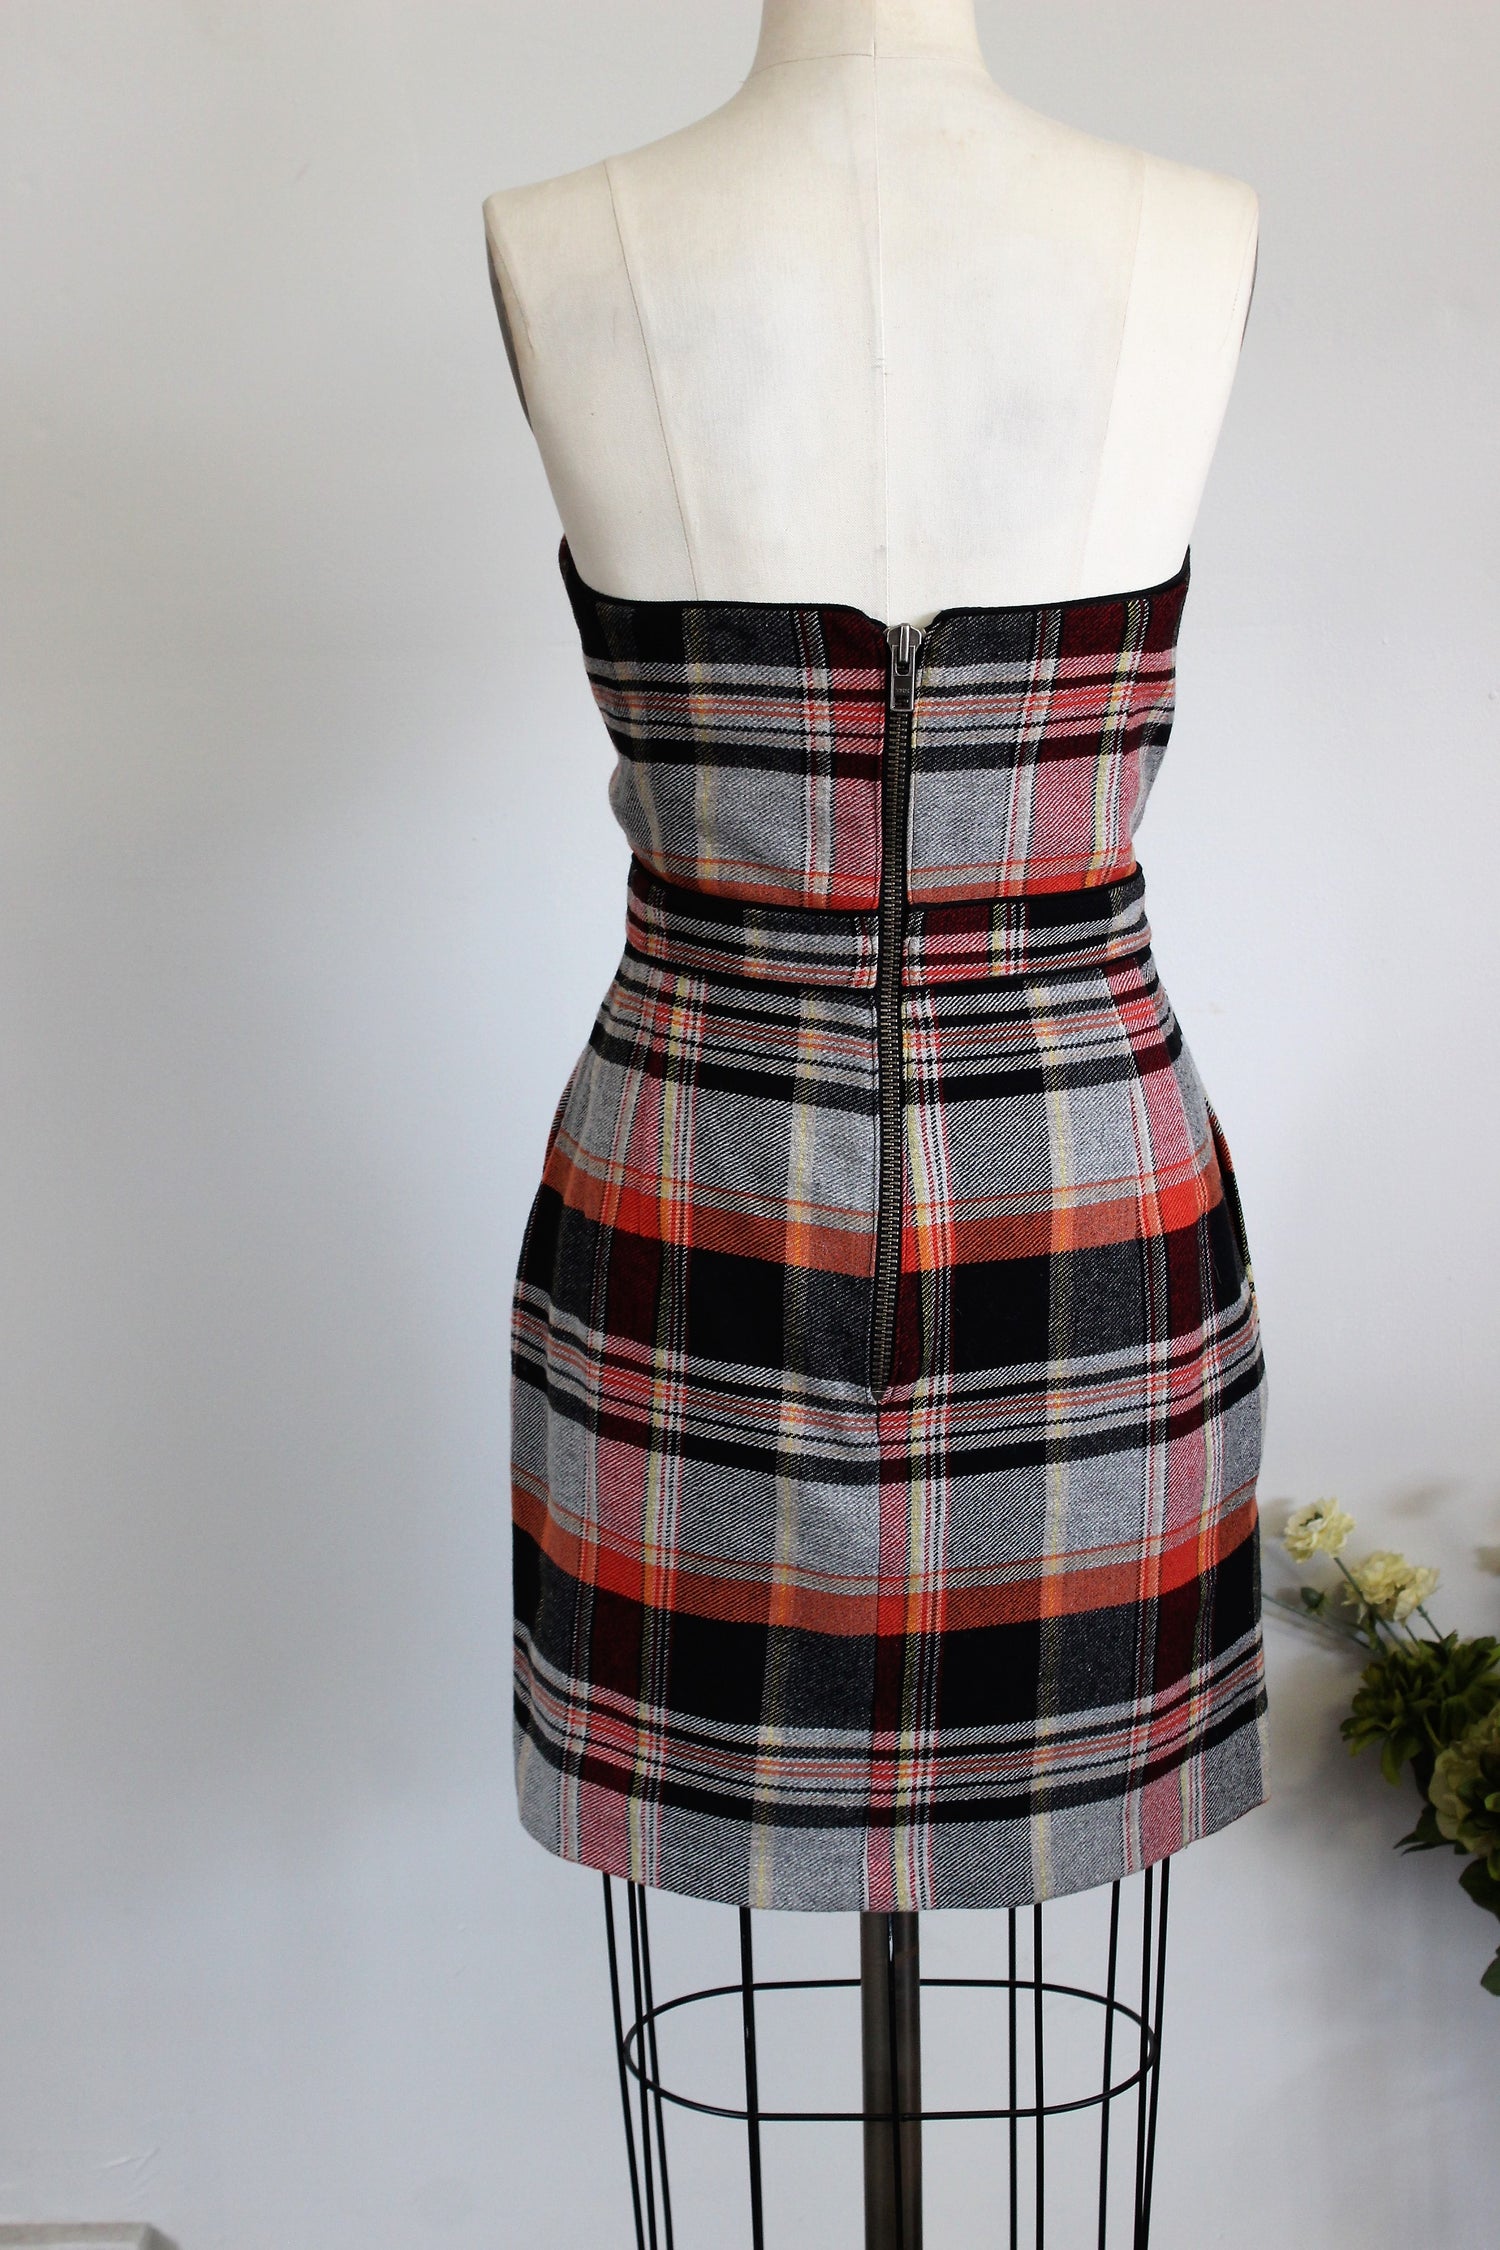 French Connection Plaid Strapless Dress with Pockets SZ 10